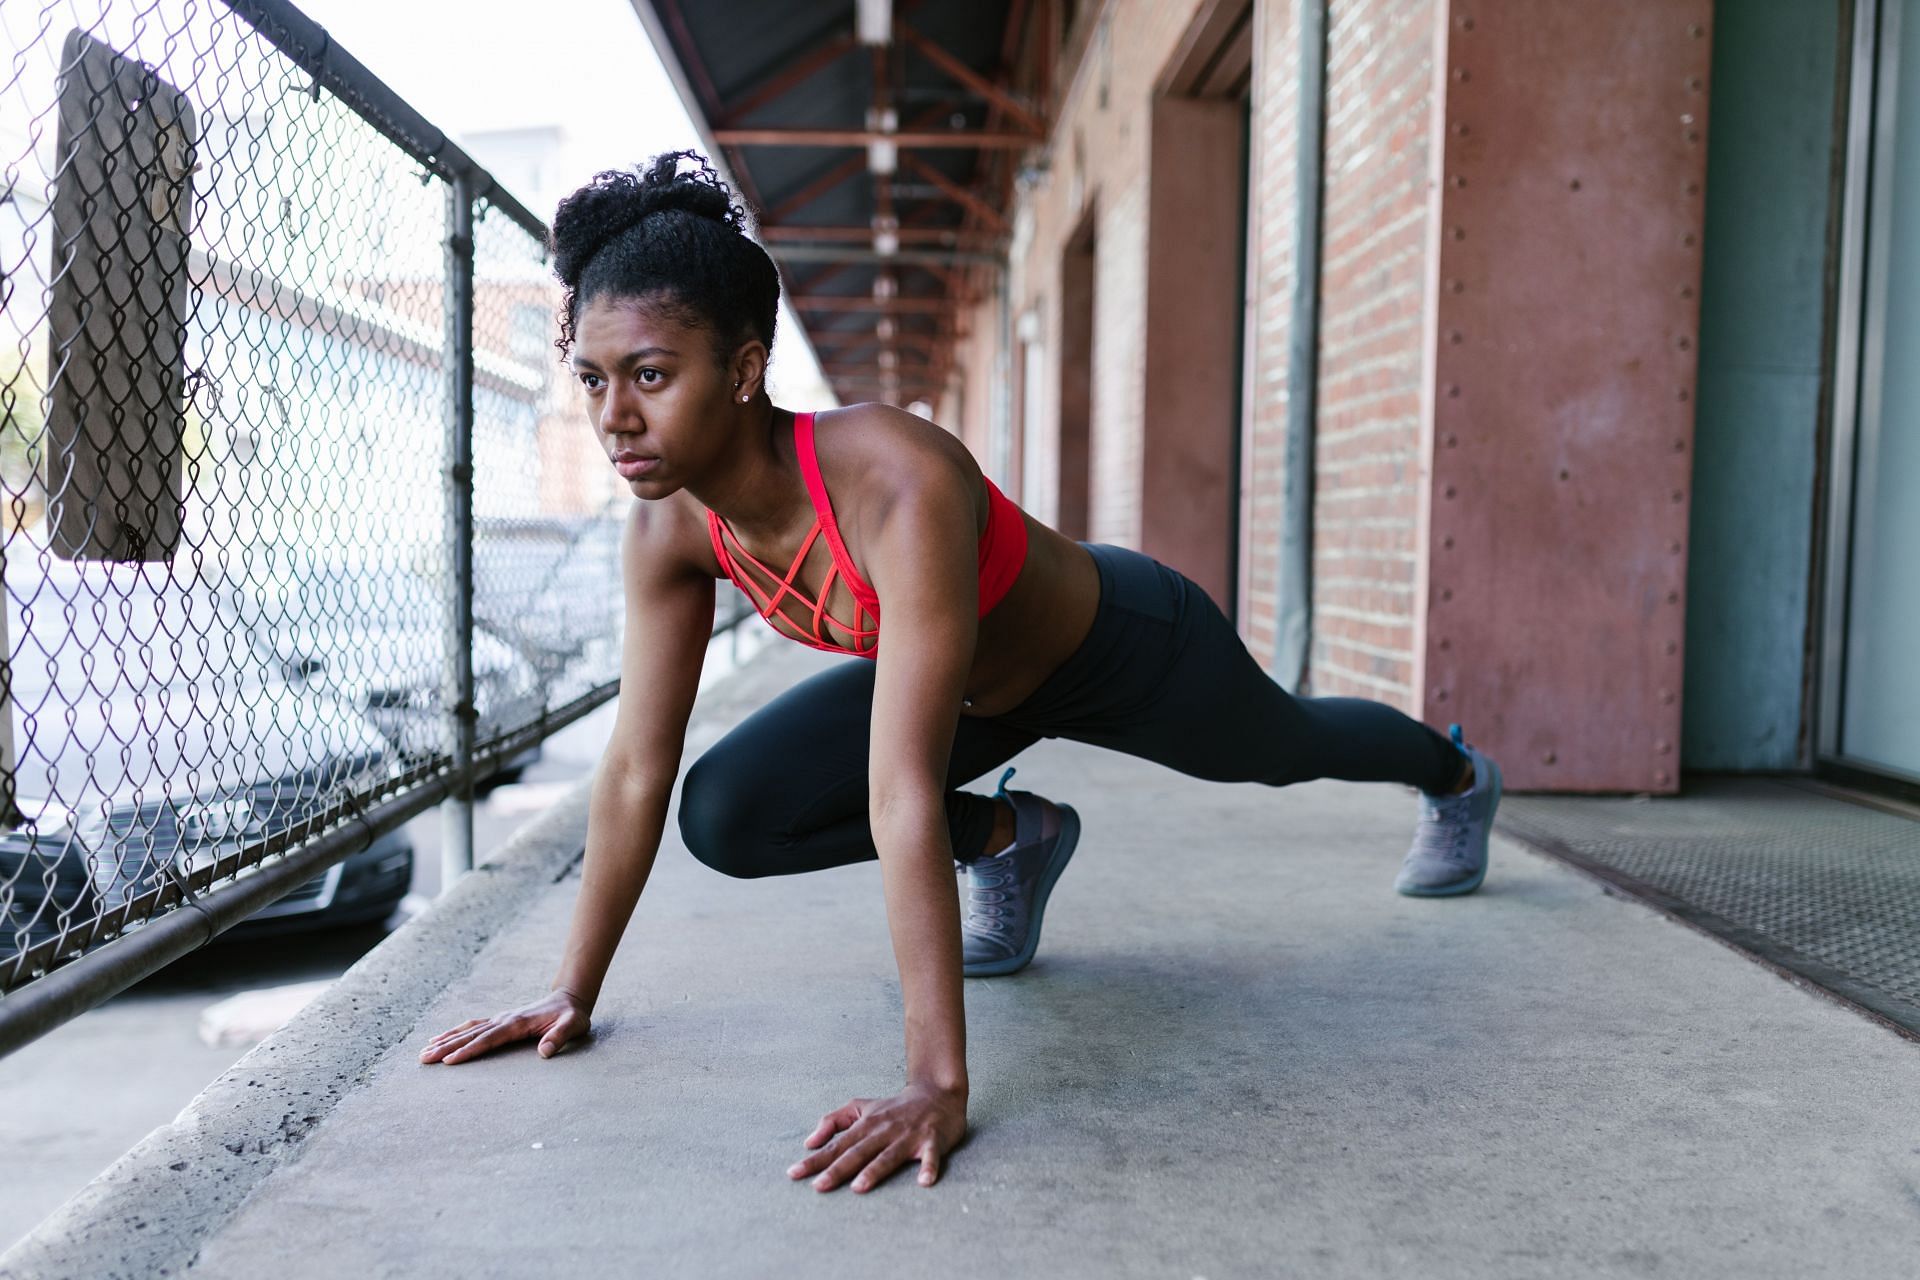 Bodyweight exercises can help you gain muscle and improve your overall fitness (Image via Pexels/Rodnae Productions)